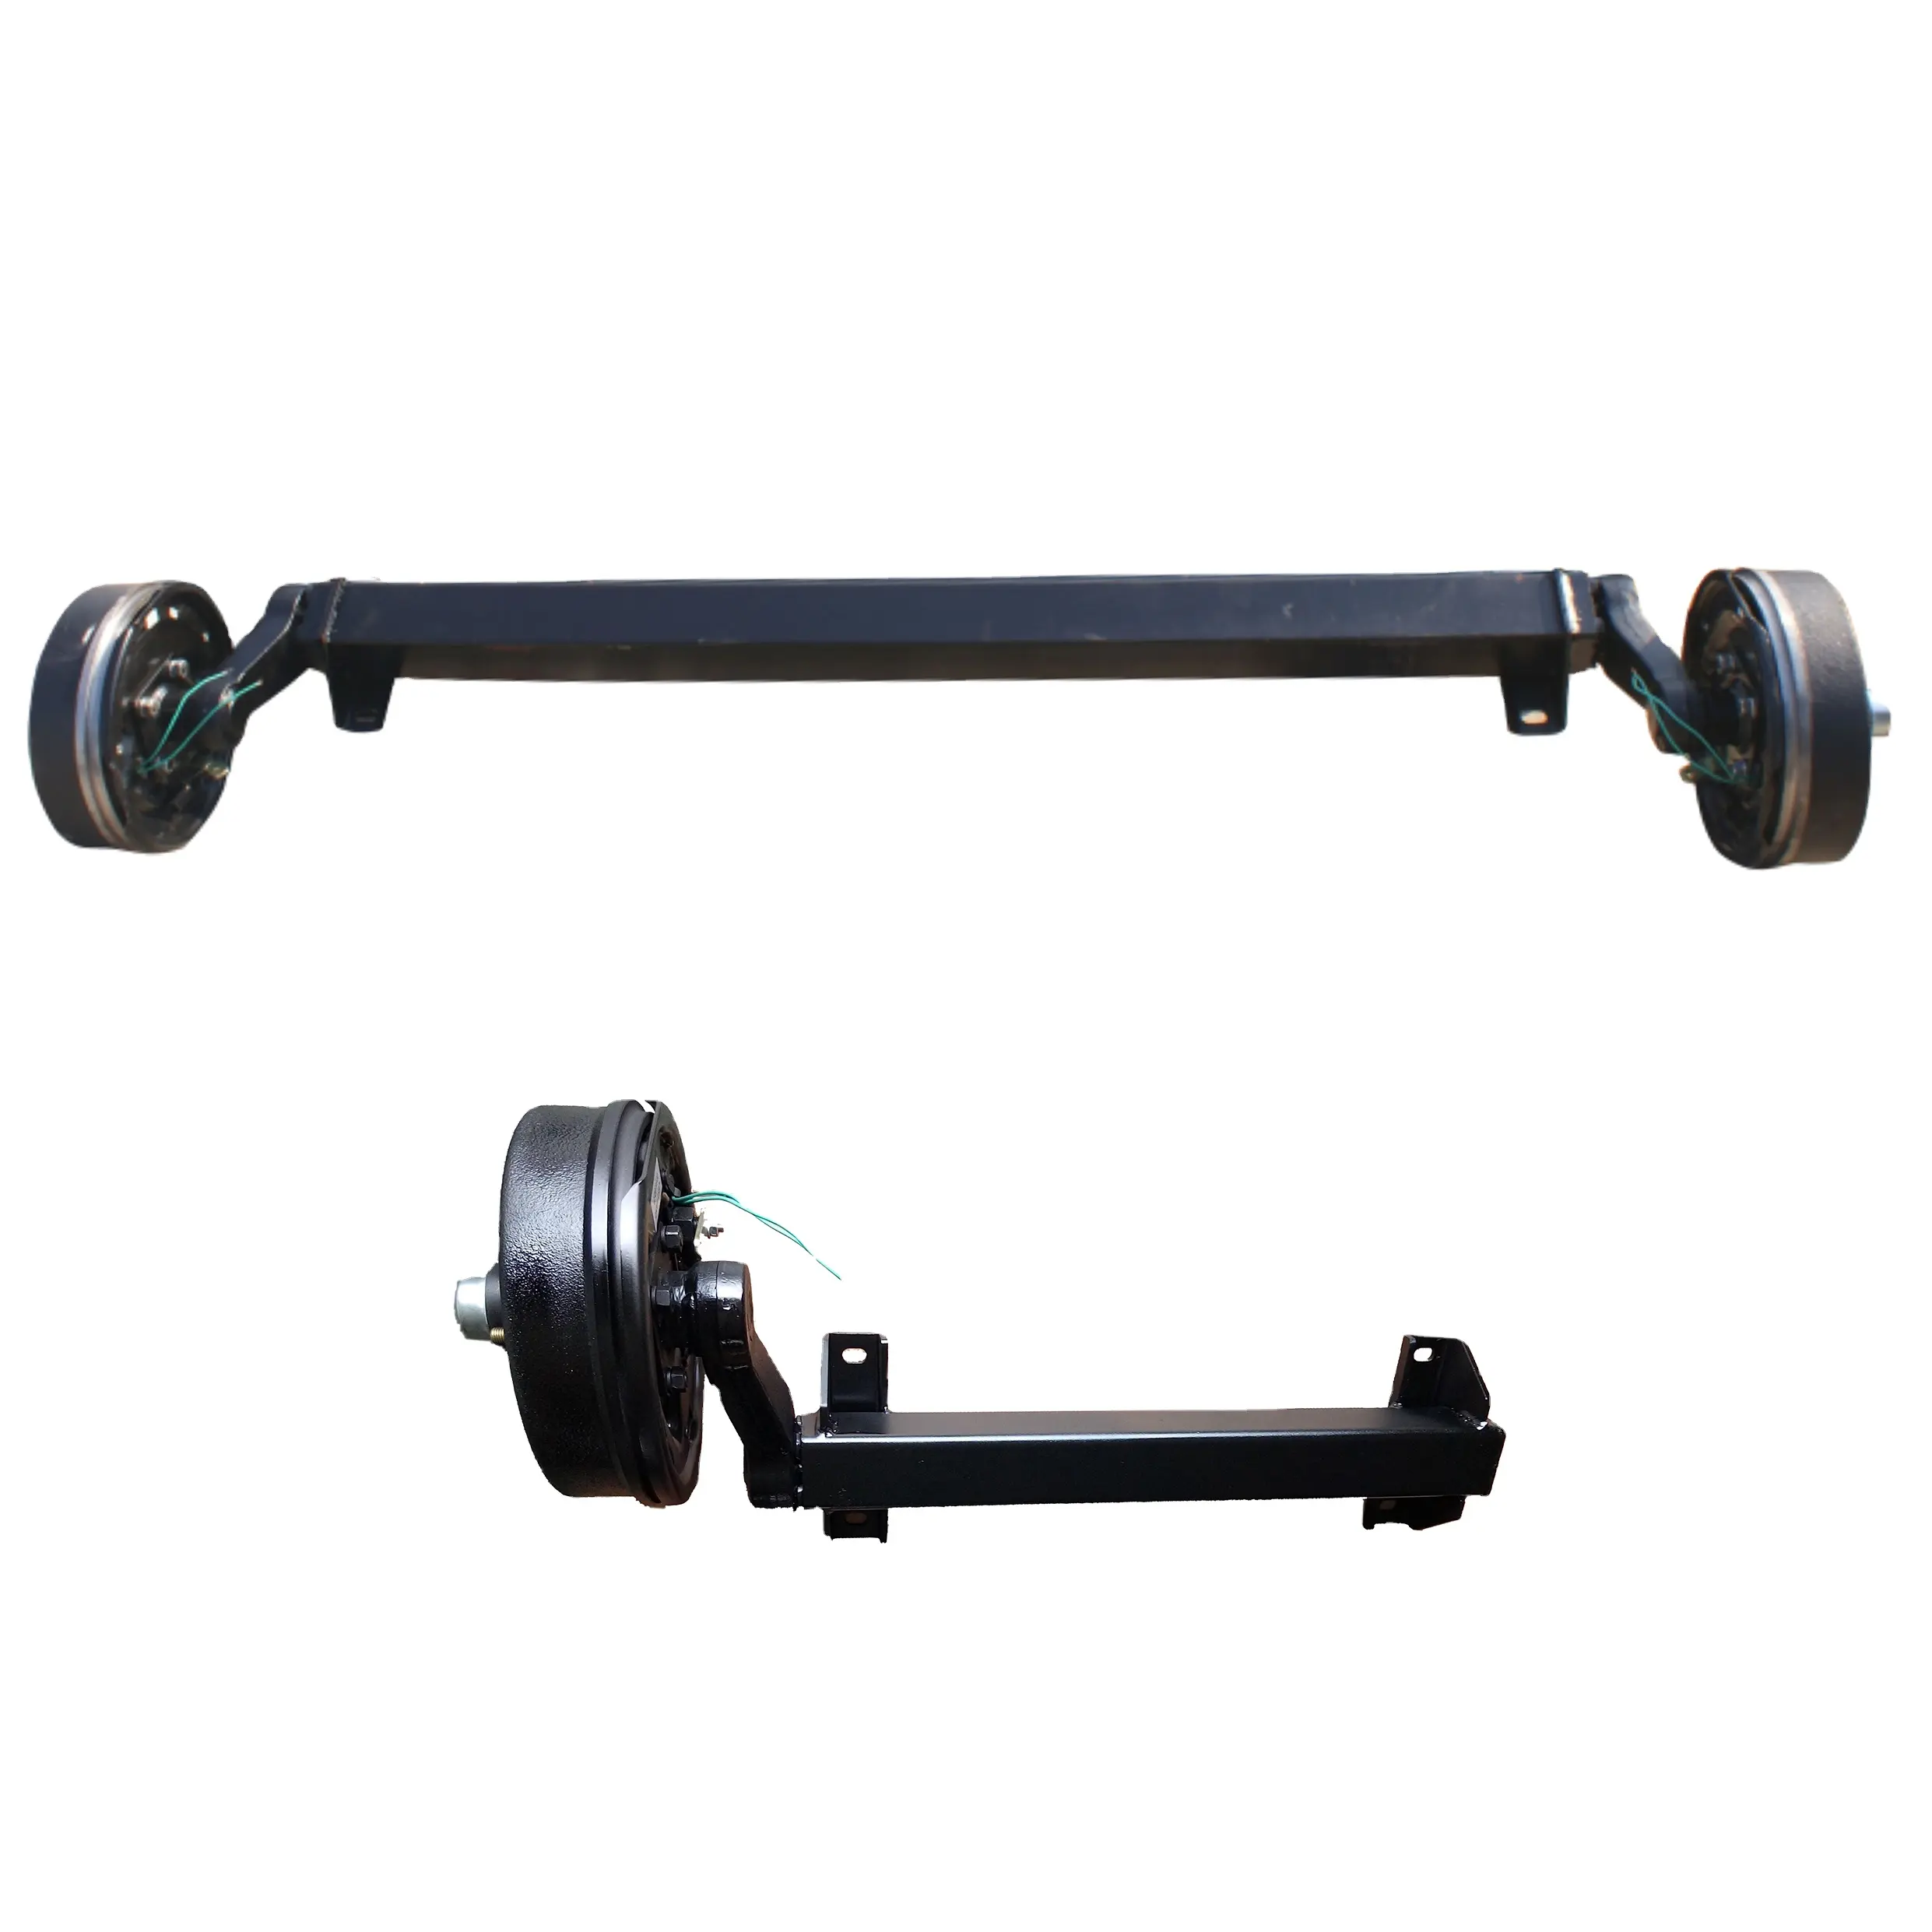 China Factory Quality Hot Sale Small Trailer Square Beam Torsion Trailer Axle